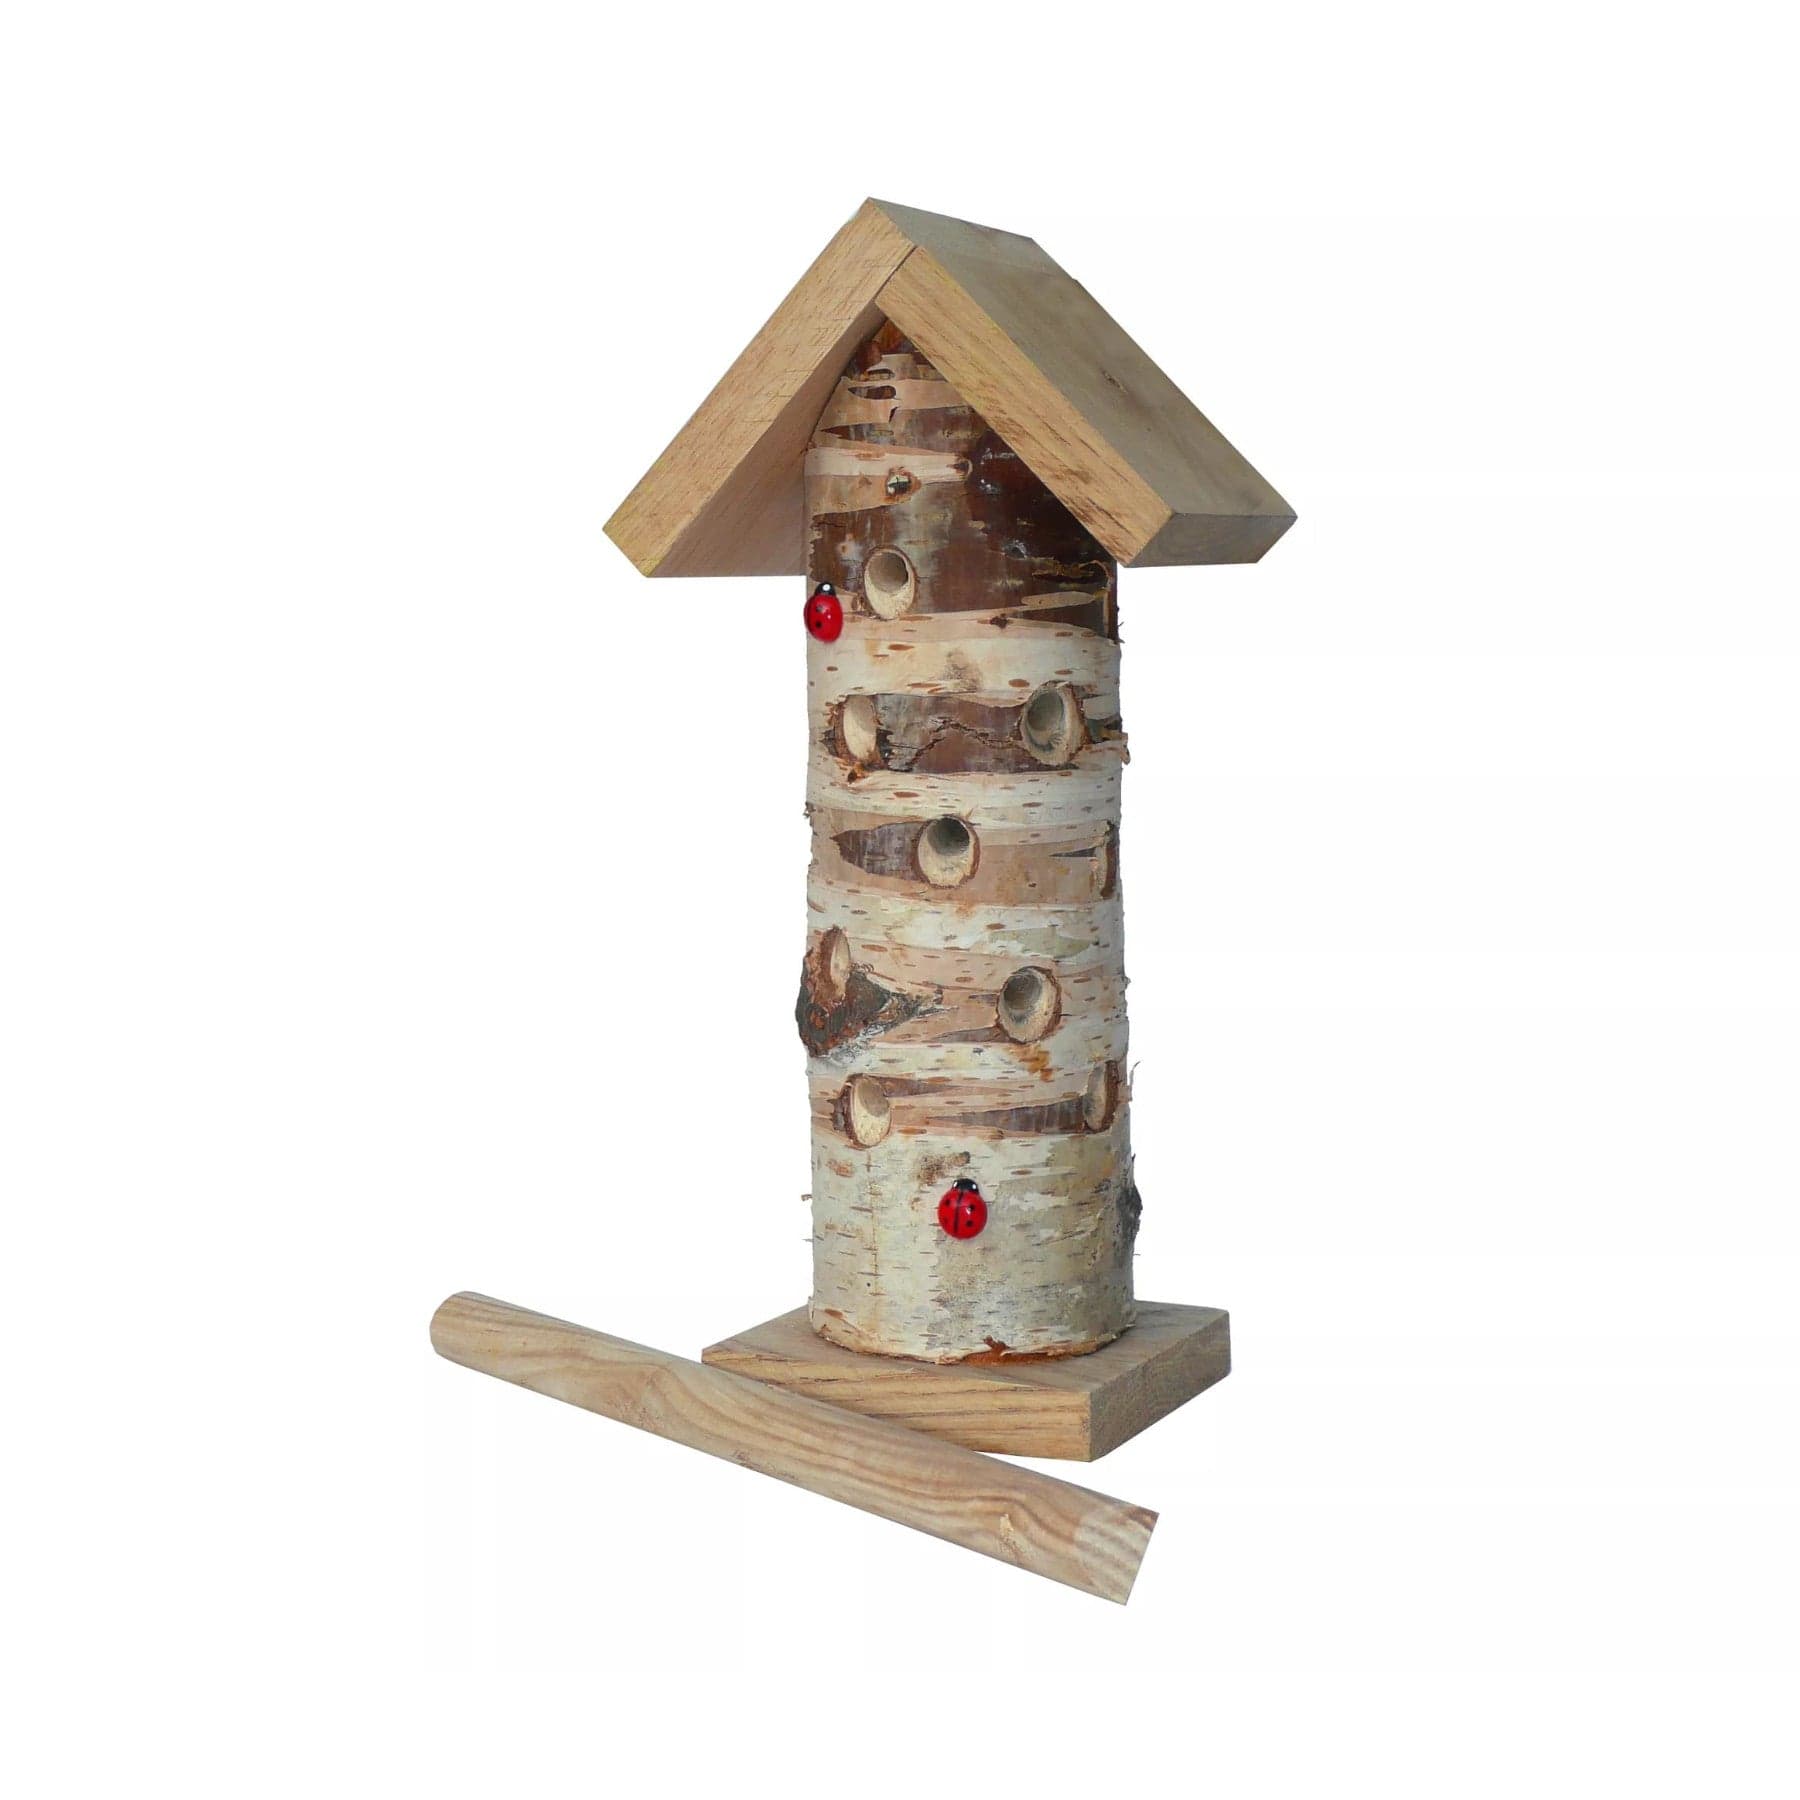 Rustic birch log birdhouse with natural wood perch and red entrance accents on white background